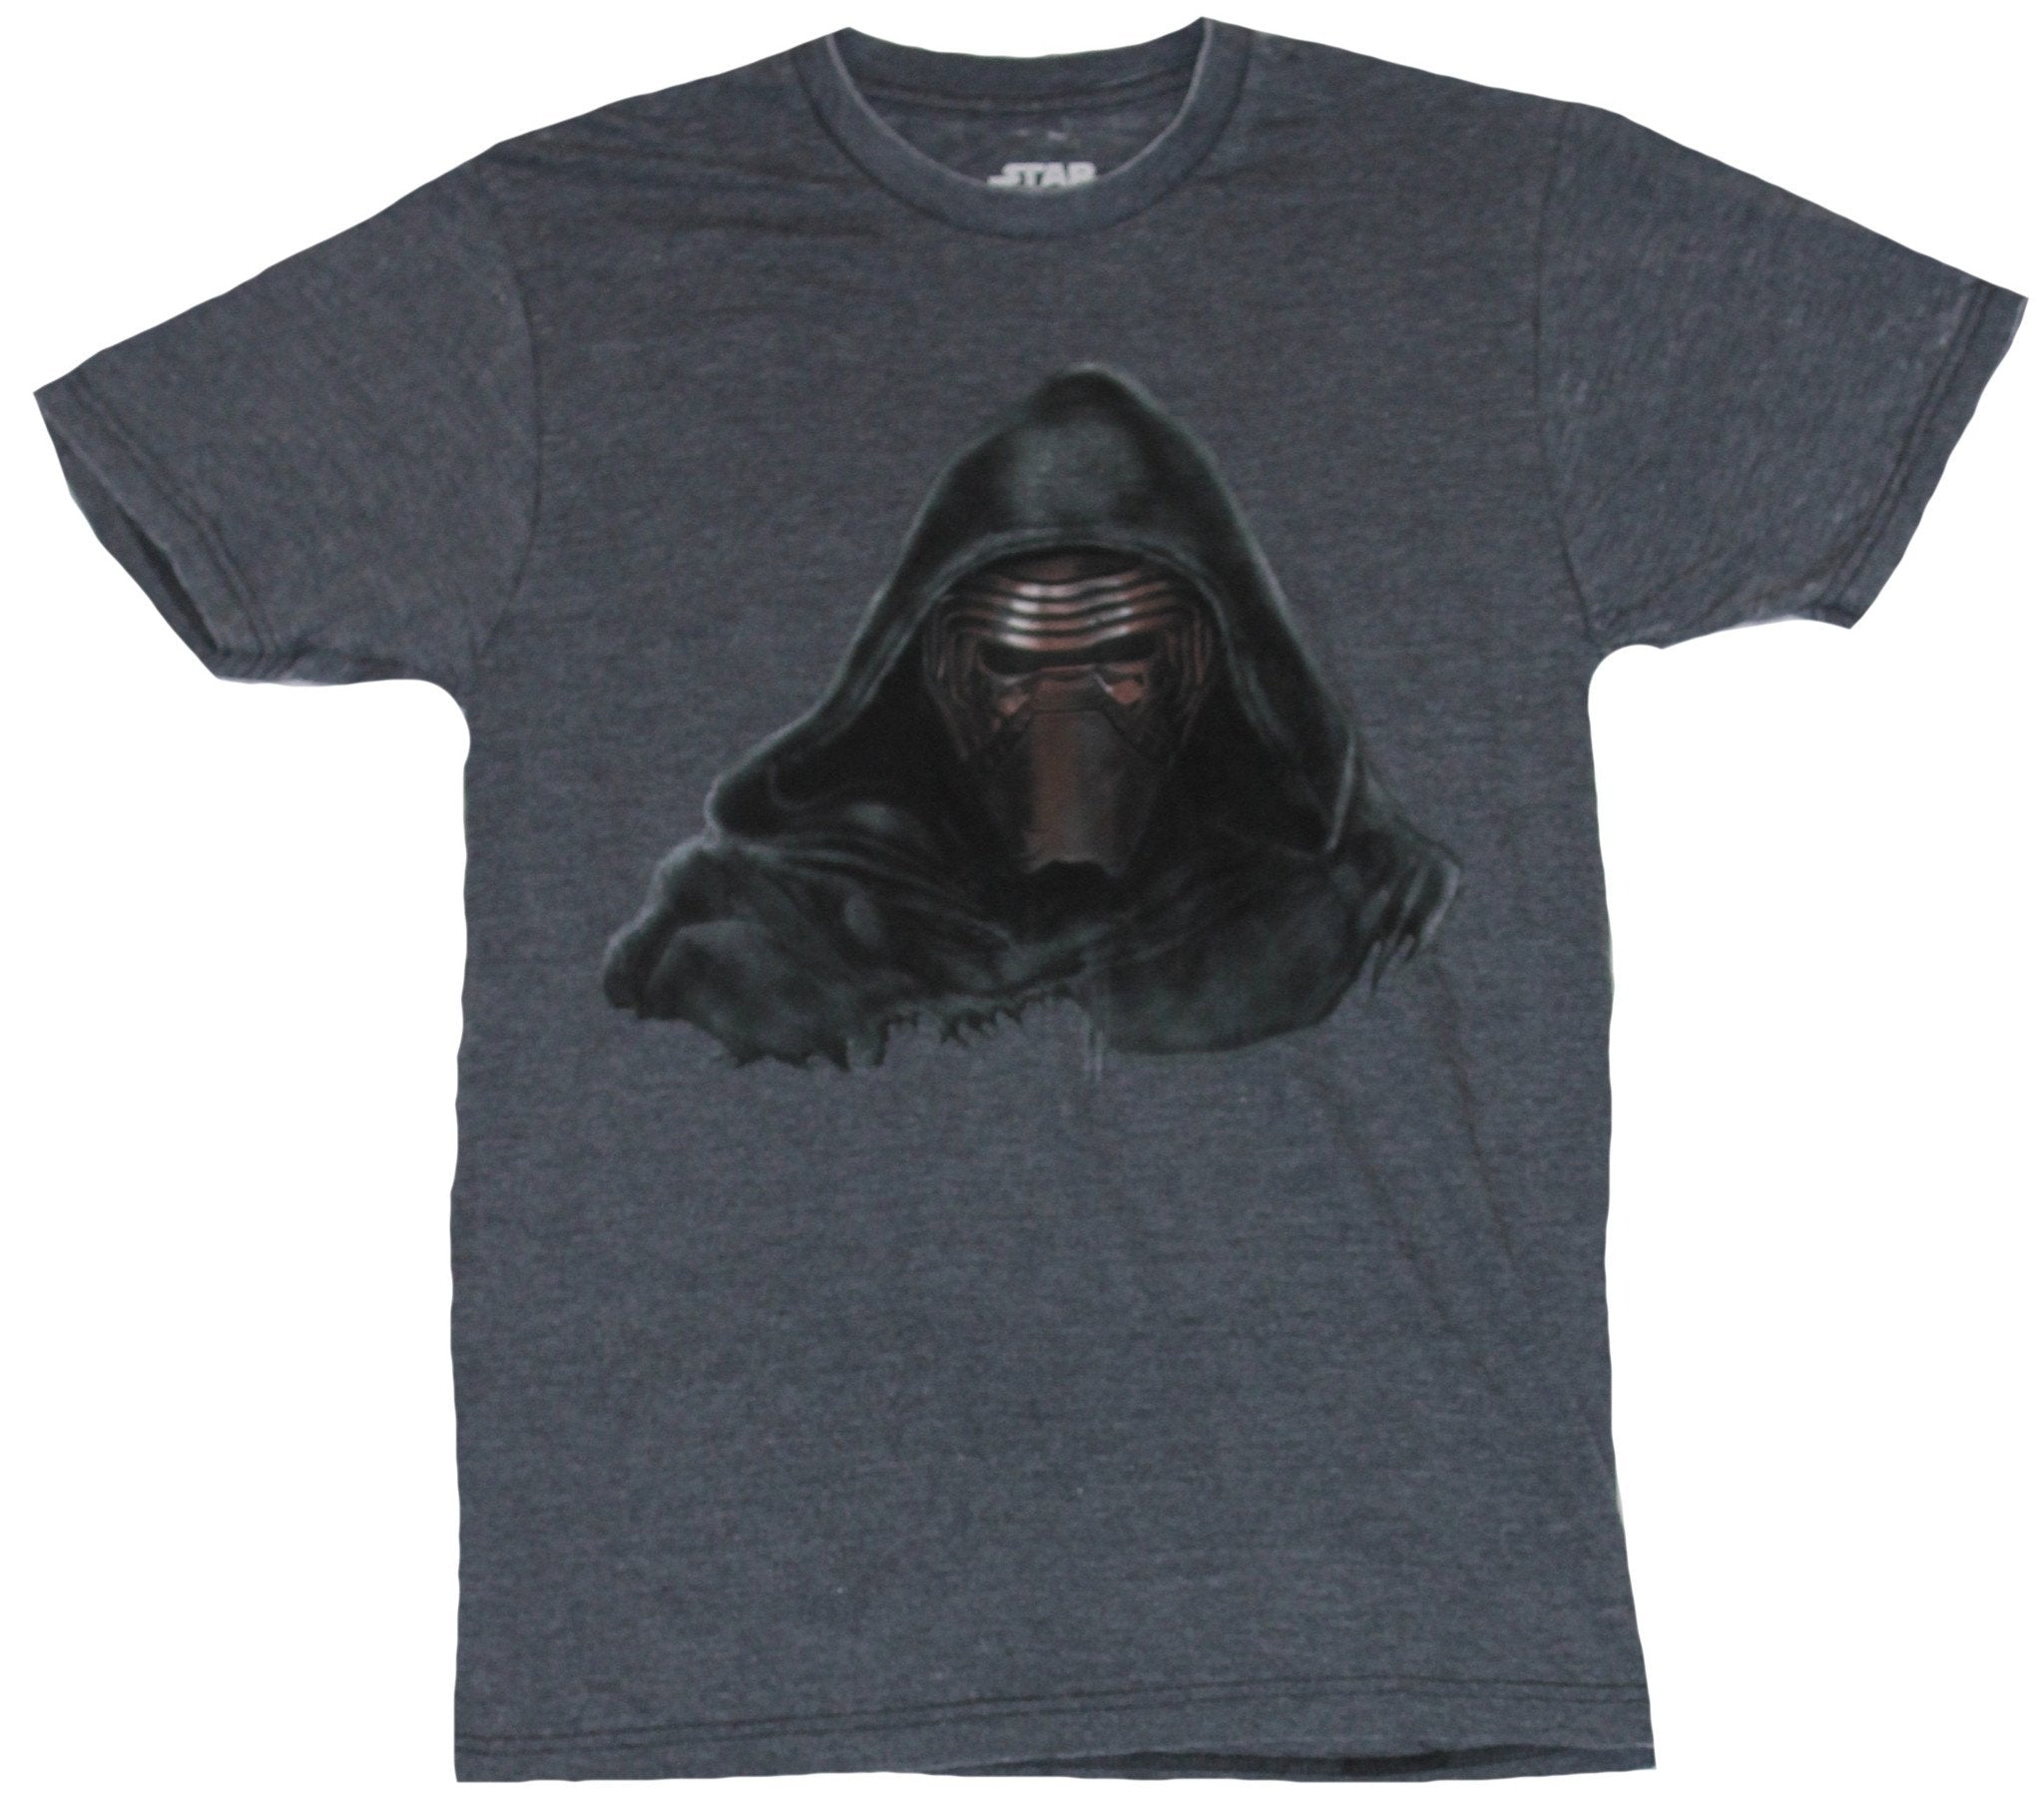 Star Wars Mens T-Shirt - Kylo Ren The Force Awakens Scary Face